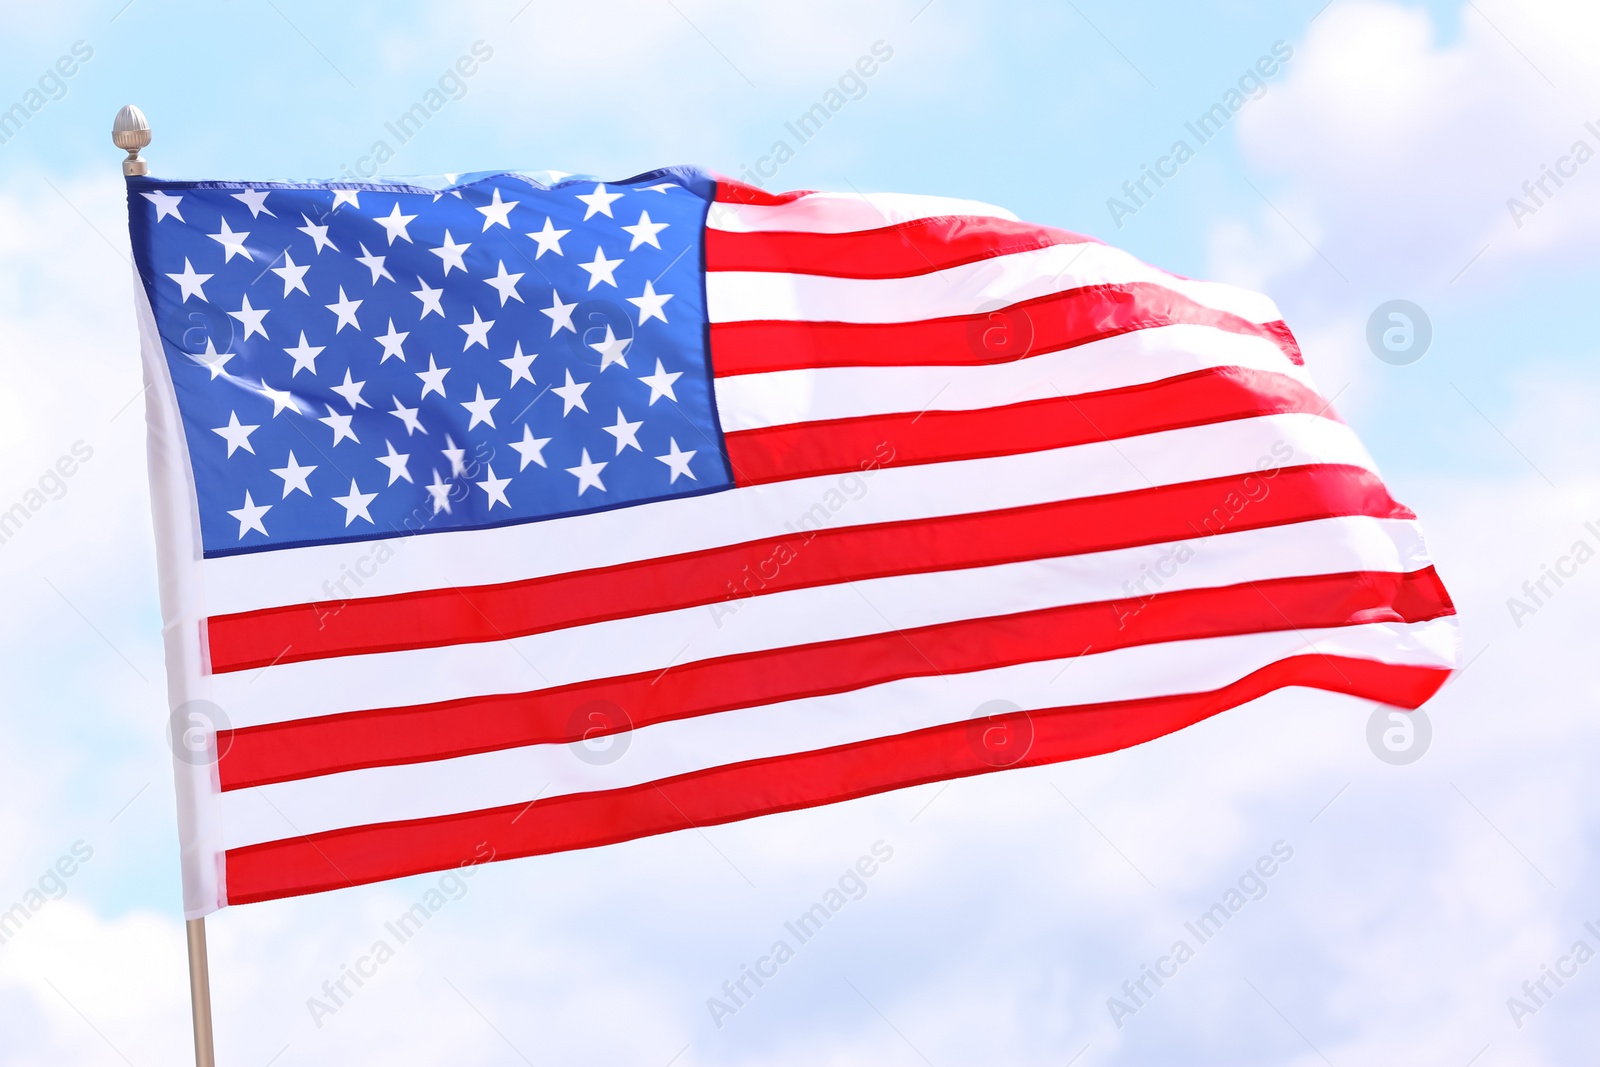 Photo of American flag fluttering outdoors on cloudy day